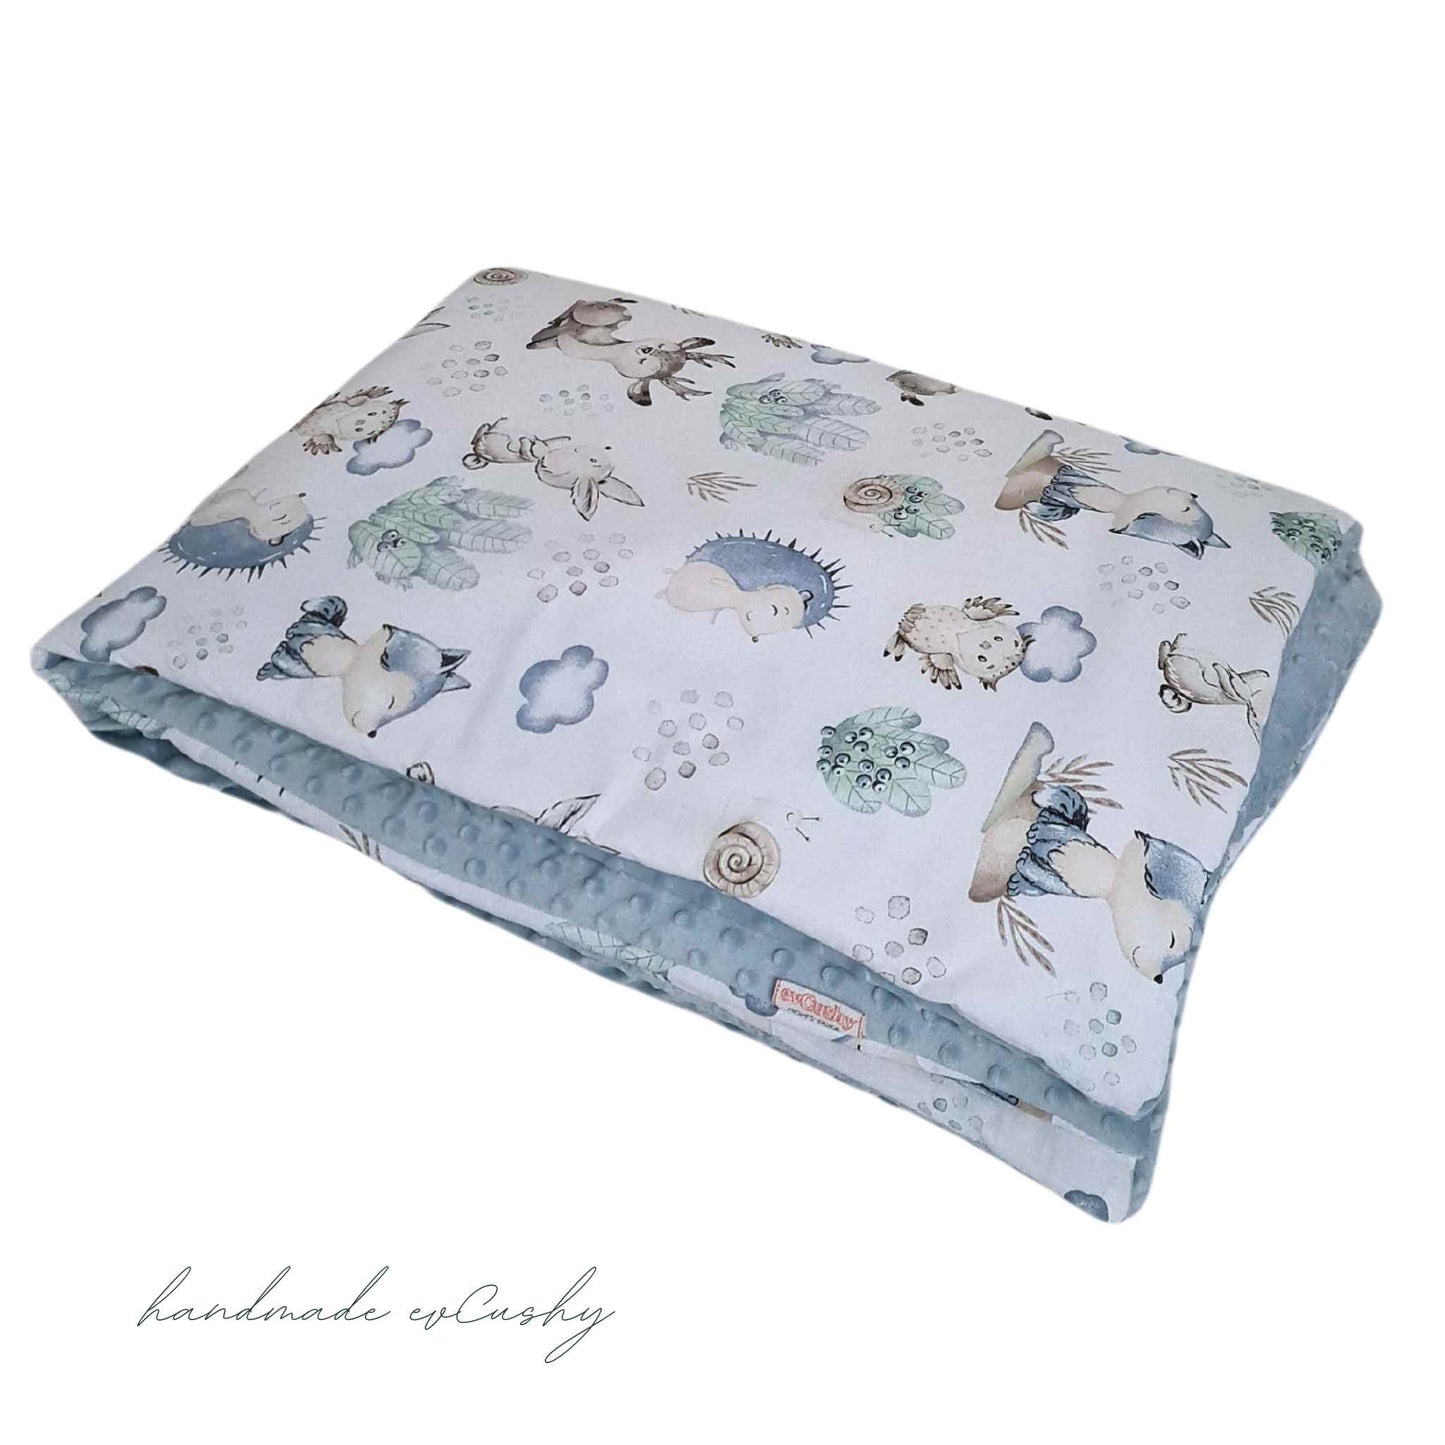 bedding set for toddler cosy warm blanket for cot bed blue fleece on one side and woodland pattern cotton on the reverse side evcushy